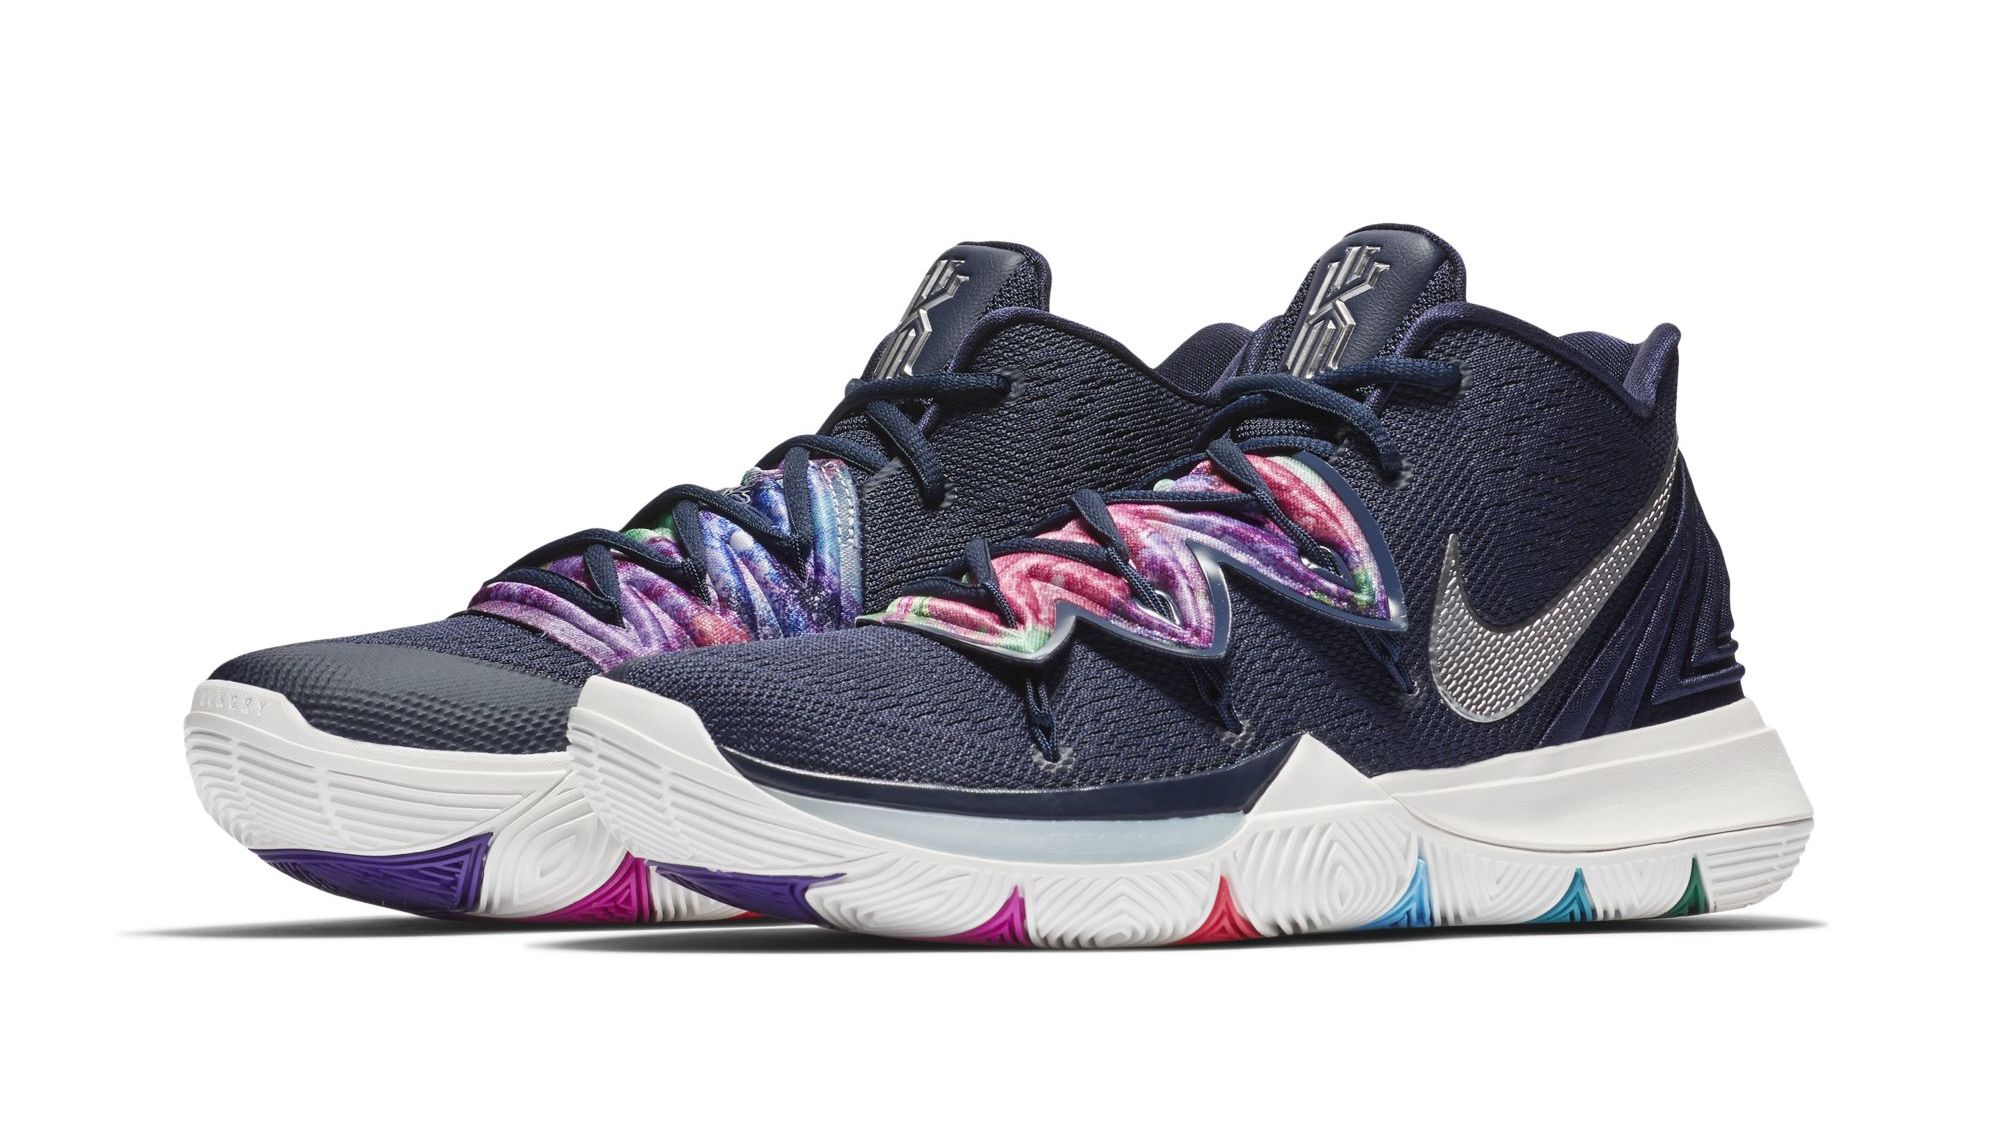 kyrie galaxy shoes